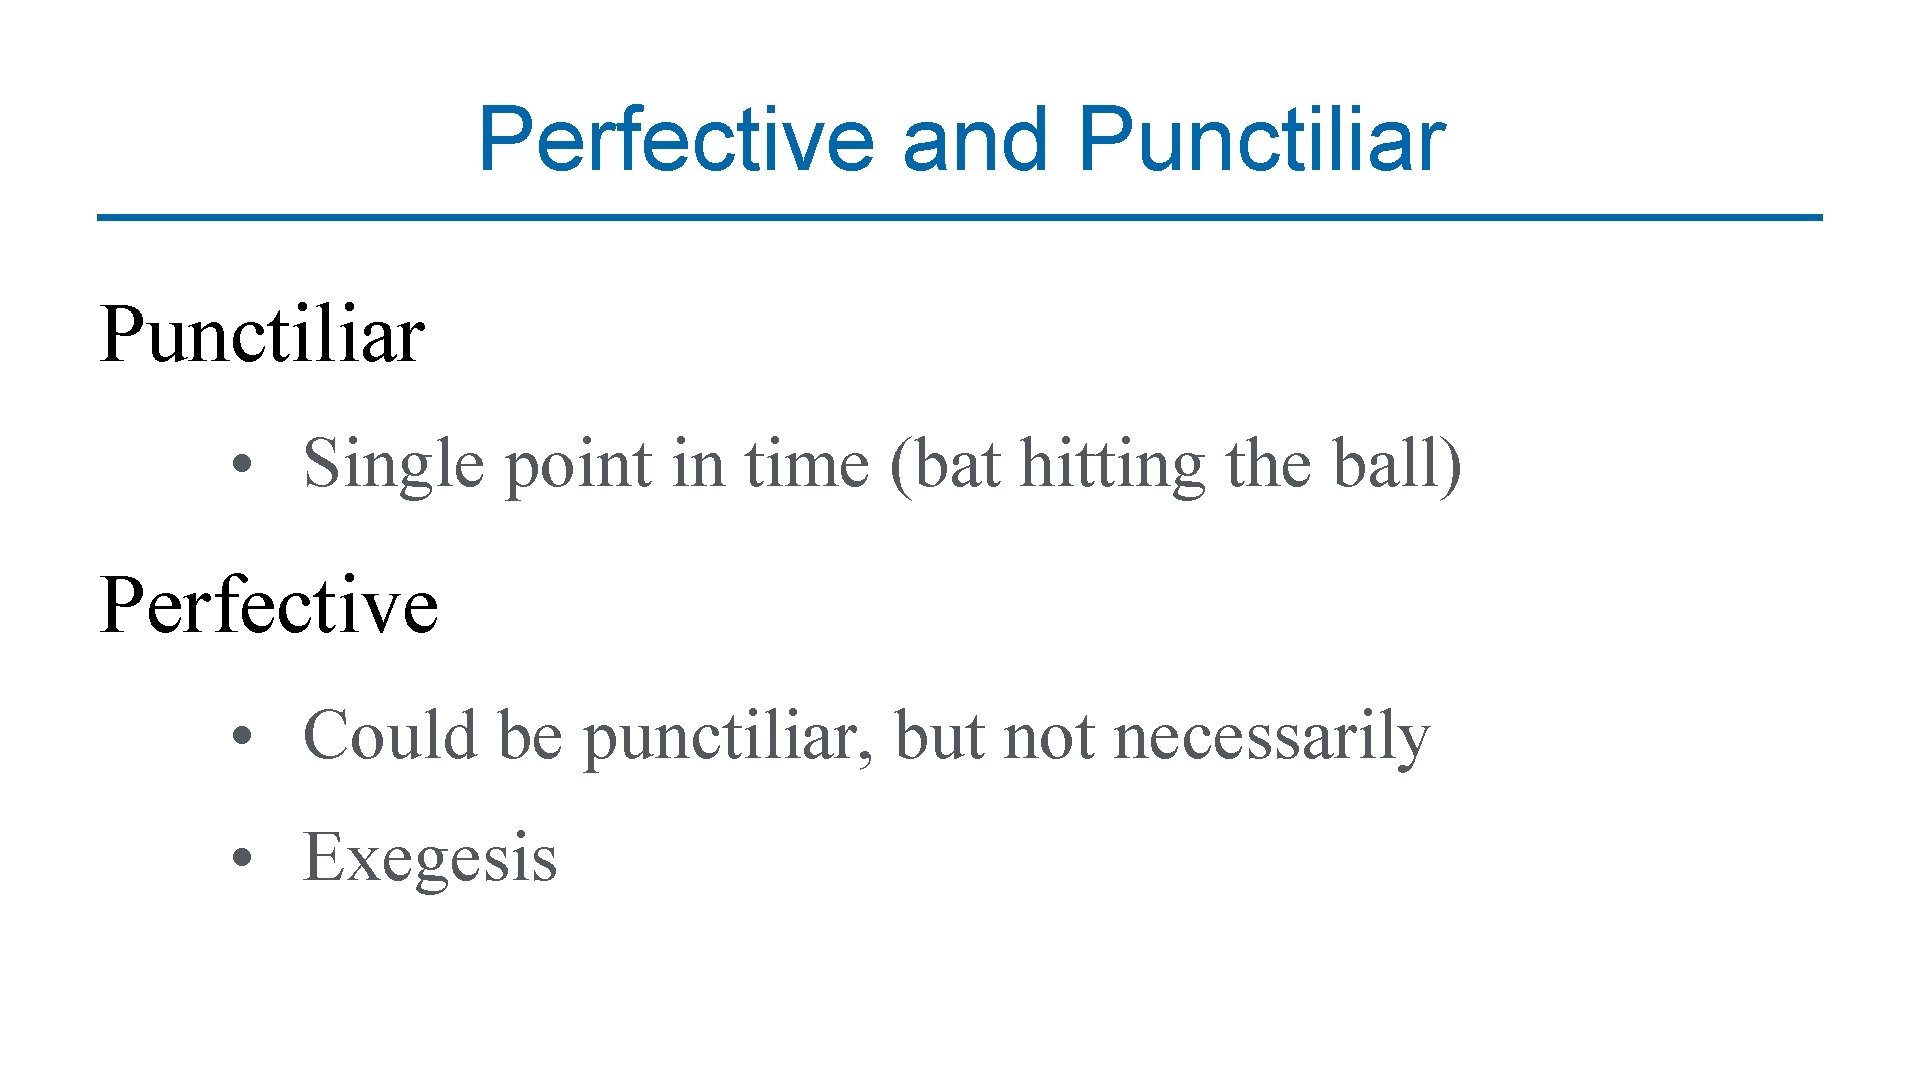 Perfective and Punctiliar • Single point in time (bat hitting the ball) Perfective •